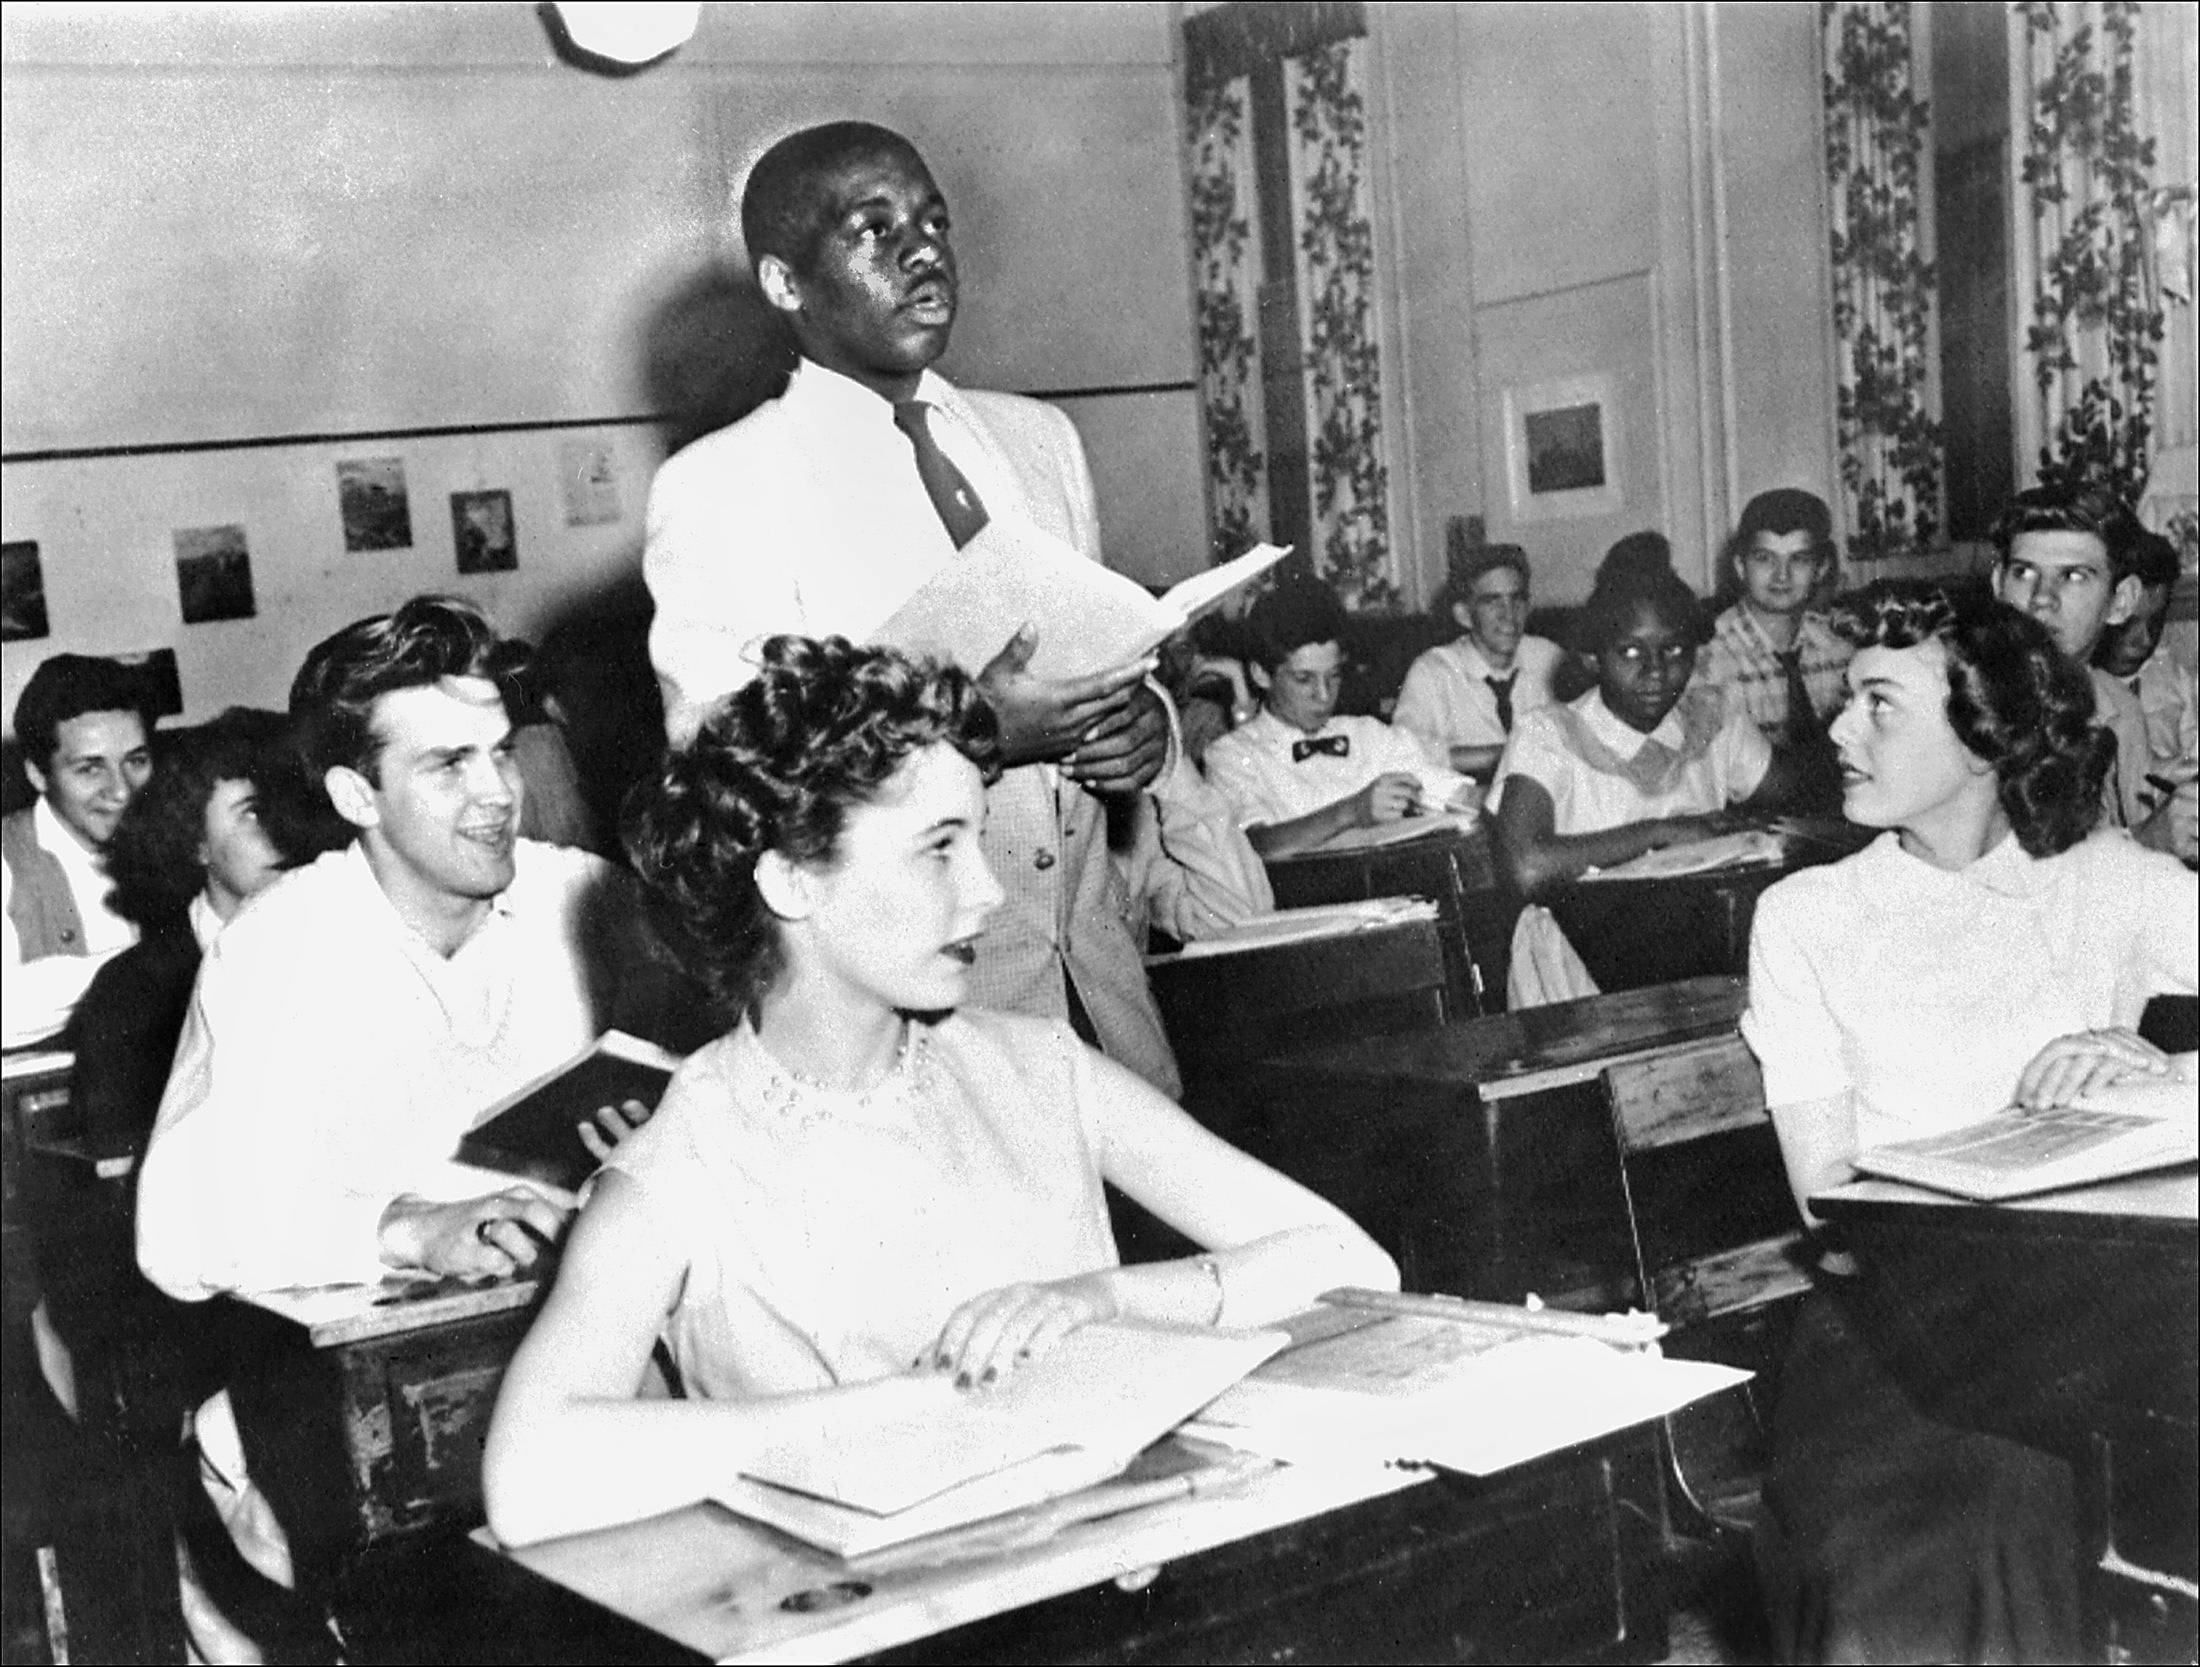 Brown v. Board of Education (1954) - The court ruled that &quot;separate schools are inherently unequal&quot; and banned segregation in public schools.&nbsp; The decision overturned Plessy v. Ferguson.In this image, a Black student recites his lesson surrounded by white fellows and others Black students on May 21, 1954, at Washington's Saint-Dominique school, where for the first time the Brown v. Board of Education decision was applied.&nbsp;(Photo: STAFF/AFP/Getty Images)